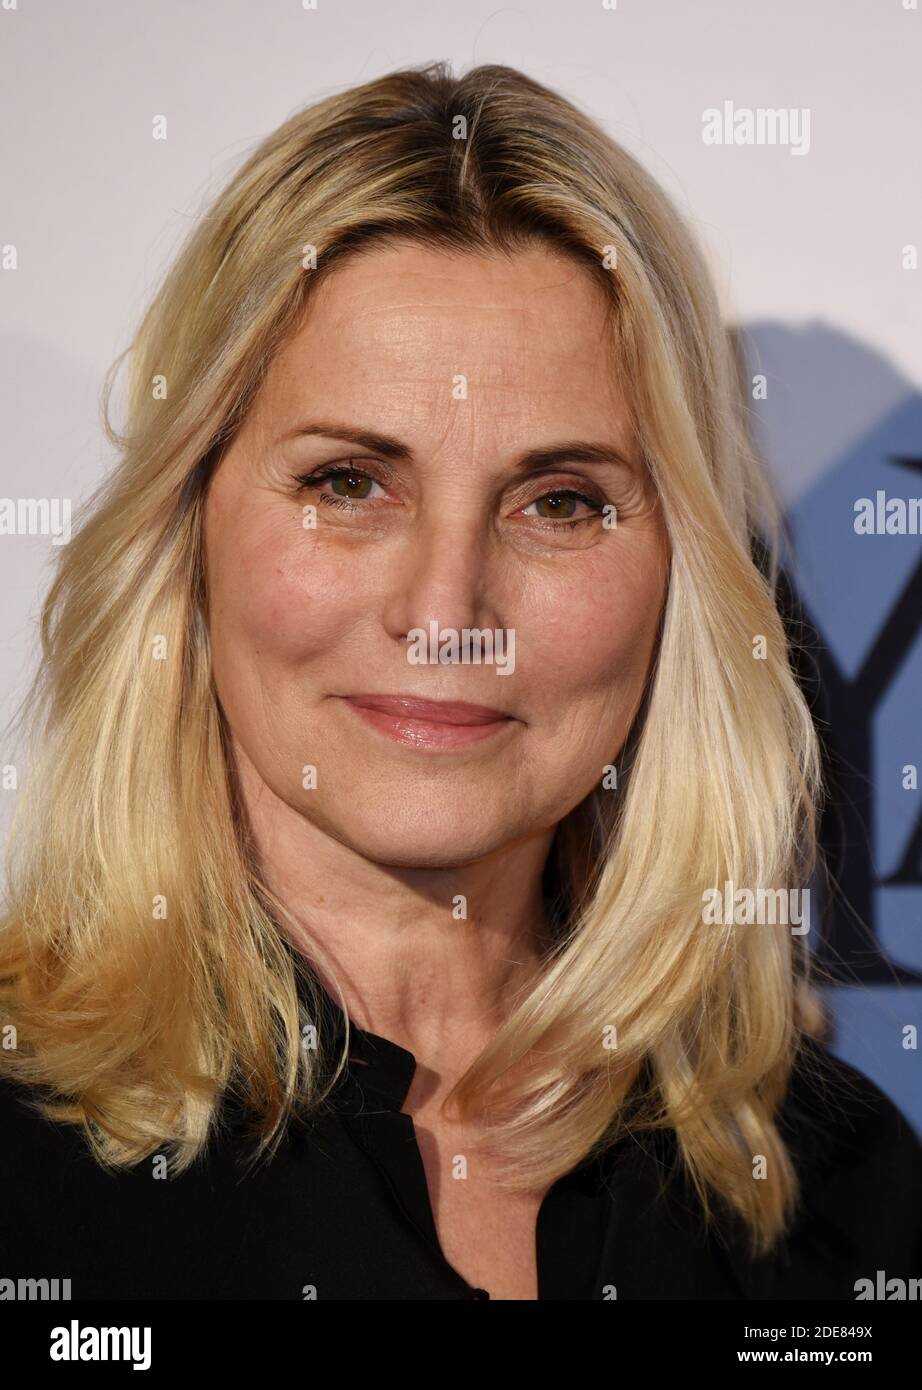 Sophie Favier attending the YAO Premiere at Le Grand Rex in Paris, France on January 15, 2019. Photo by Alain Apaydin/ABACAPRESS.COM Stock Photo